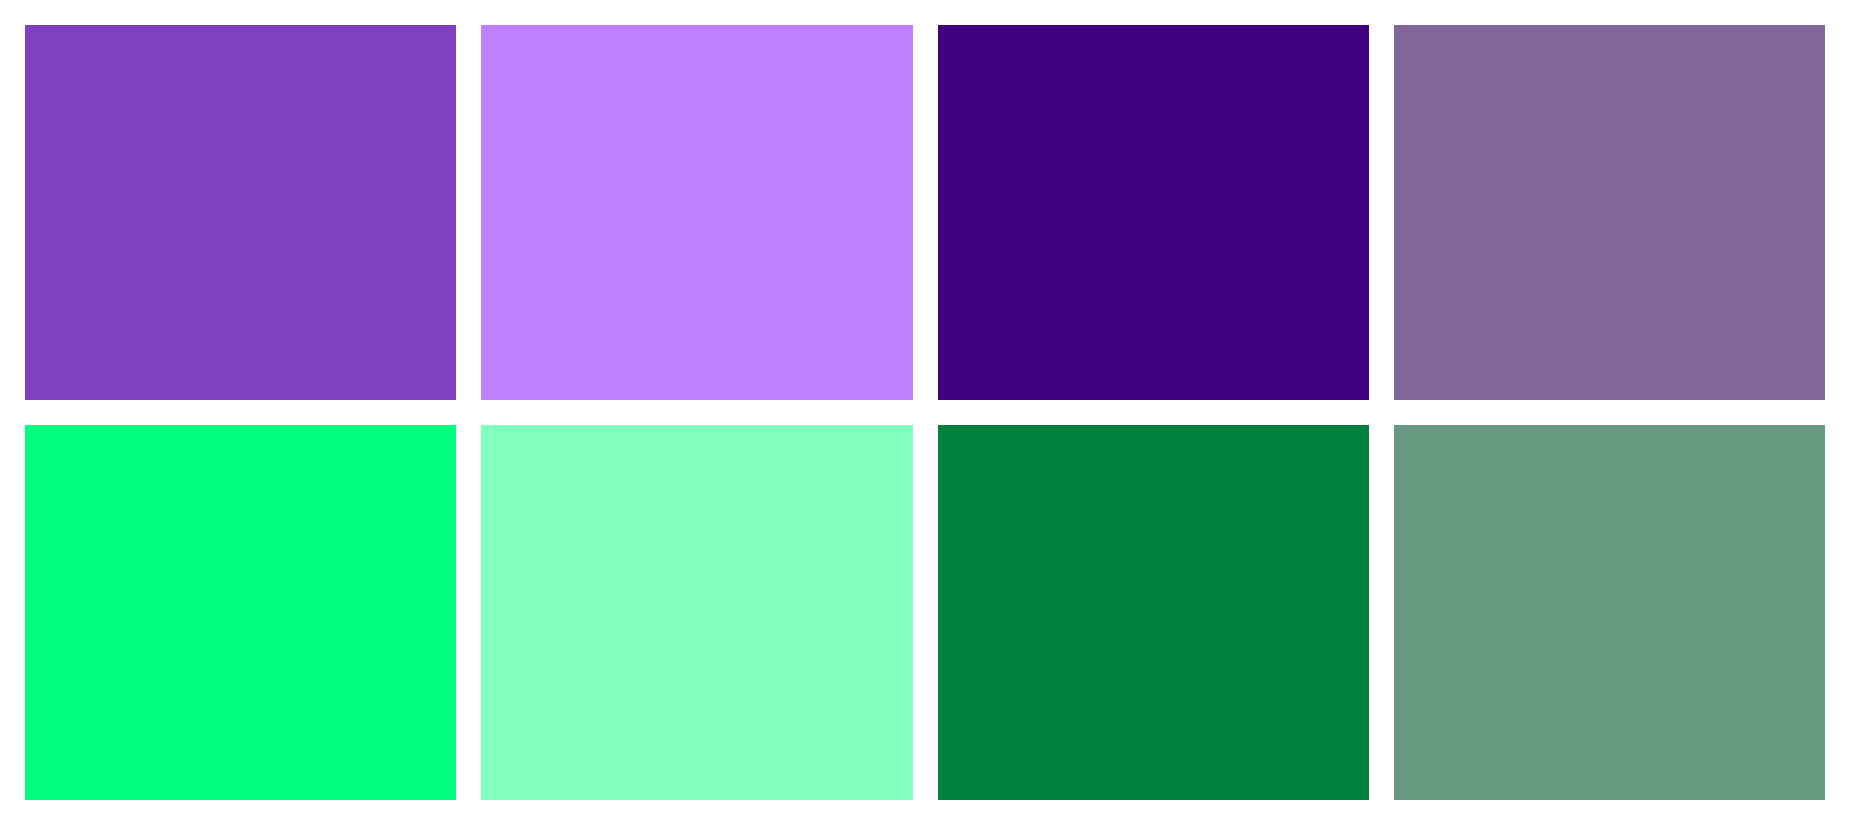 Using custom properties with the HSL function to generate a color palette